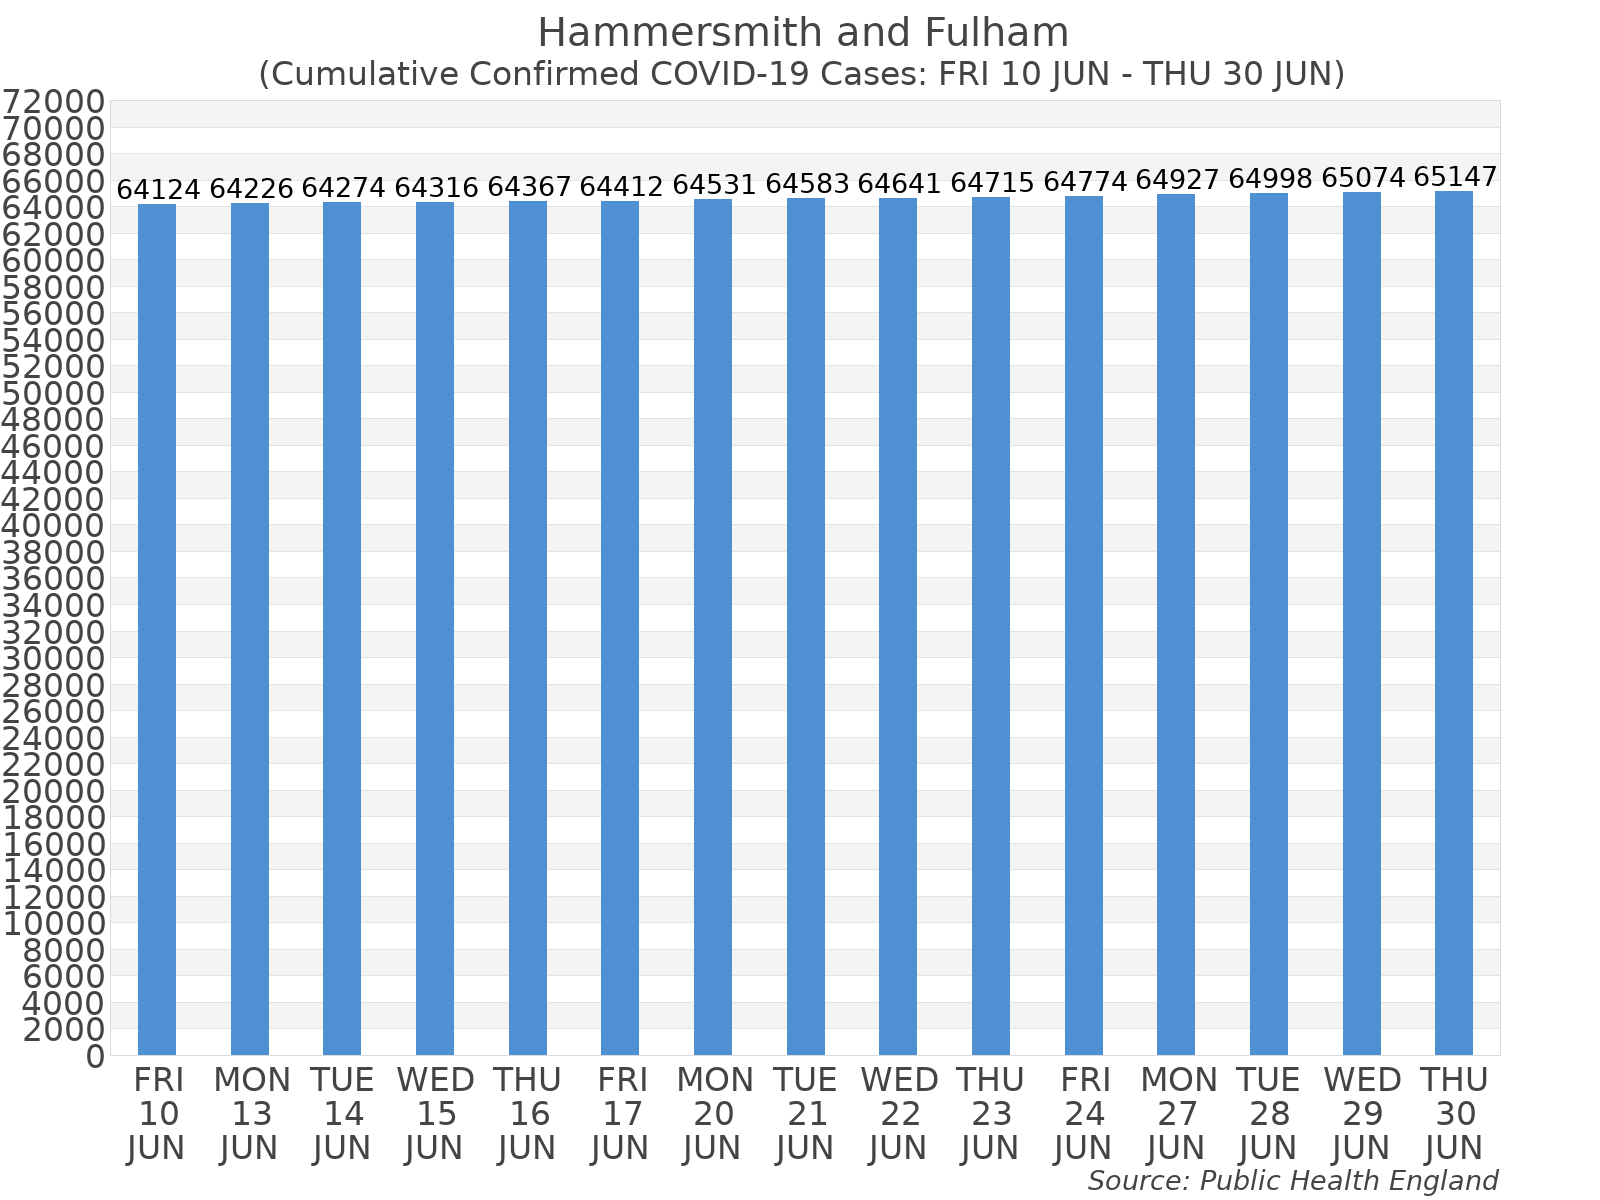 Graph tracking the number of confirmed coronavirus (COVID-19) cases where the patient lives within the Hammersmith and Fulham Upper Tier Local Authority Area.